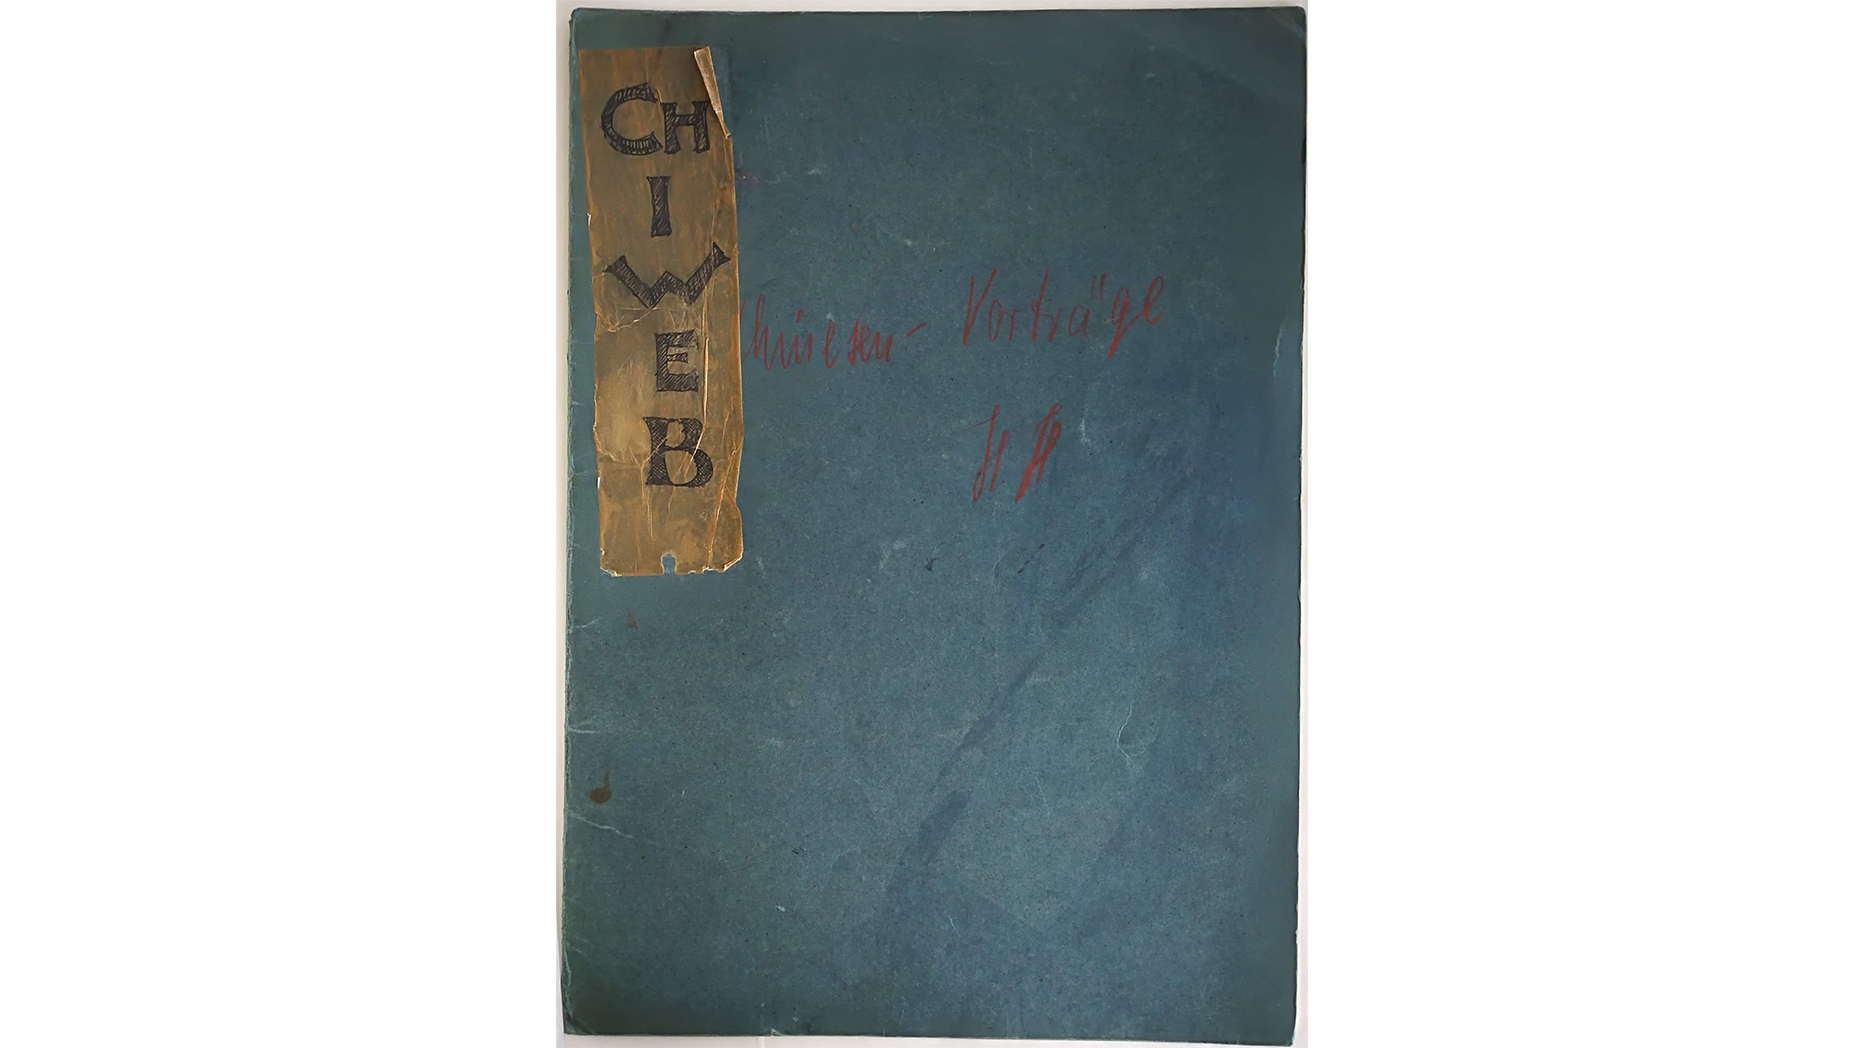 Cover of the "Chinese Werkbund" meeting minutes folder (Hugo Häring Archive, Academy of Fine Arts, Berlin)